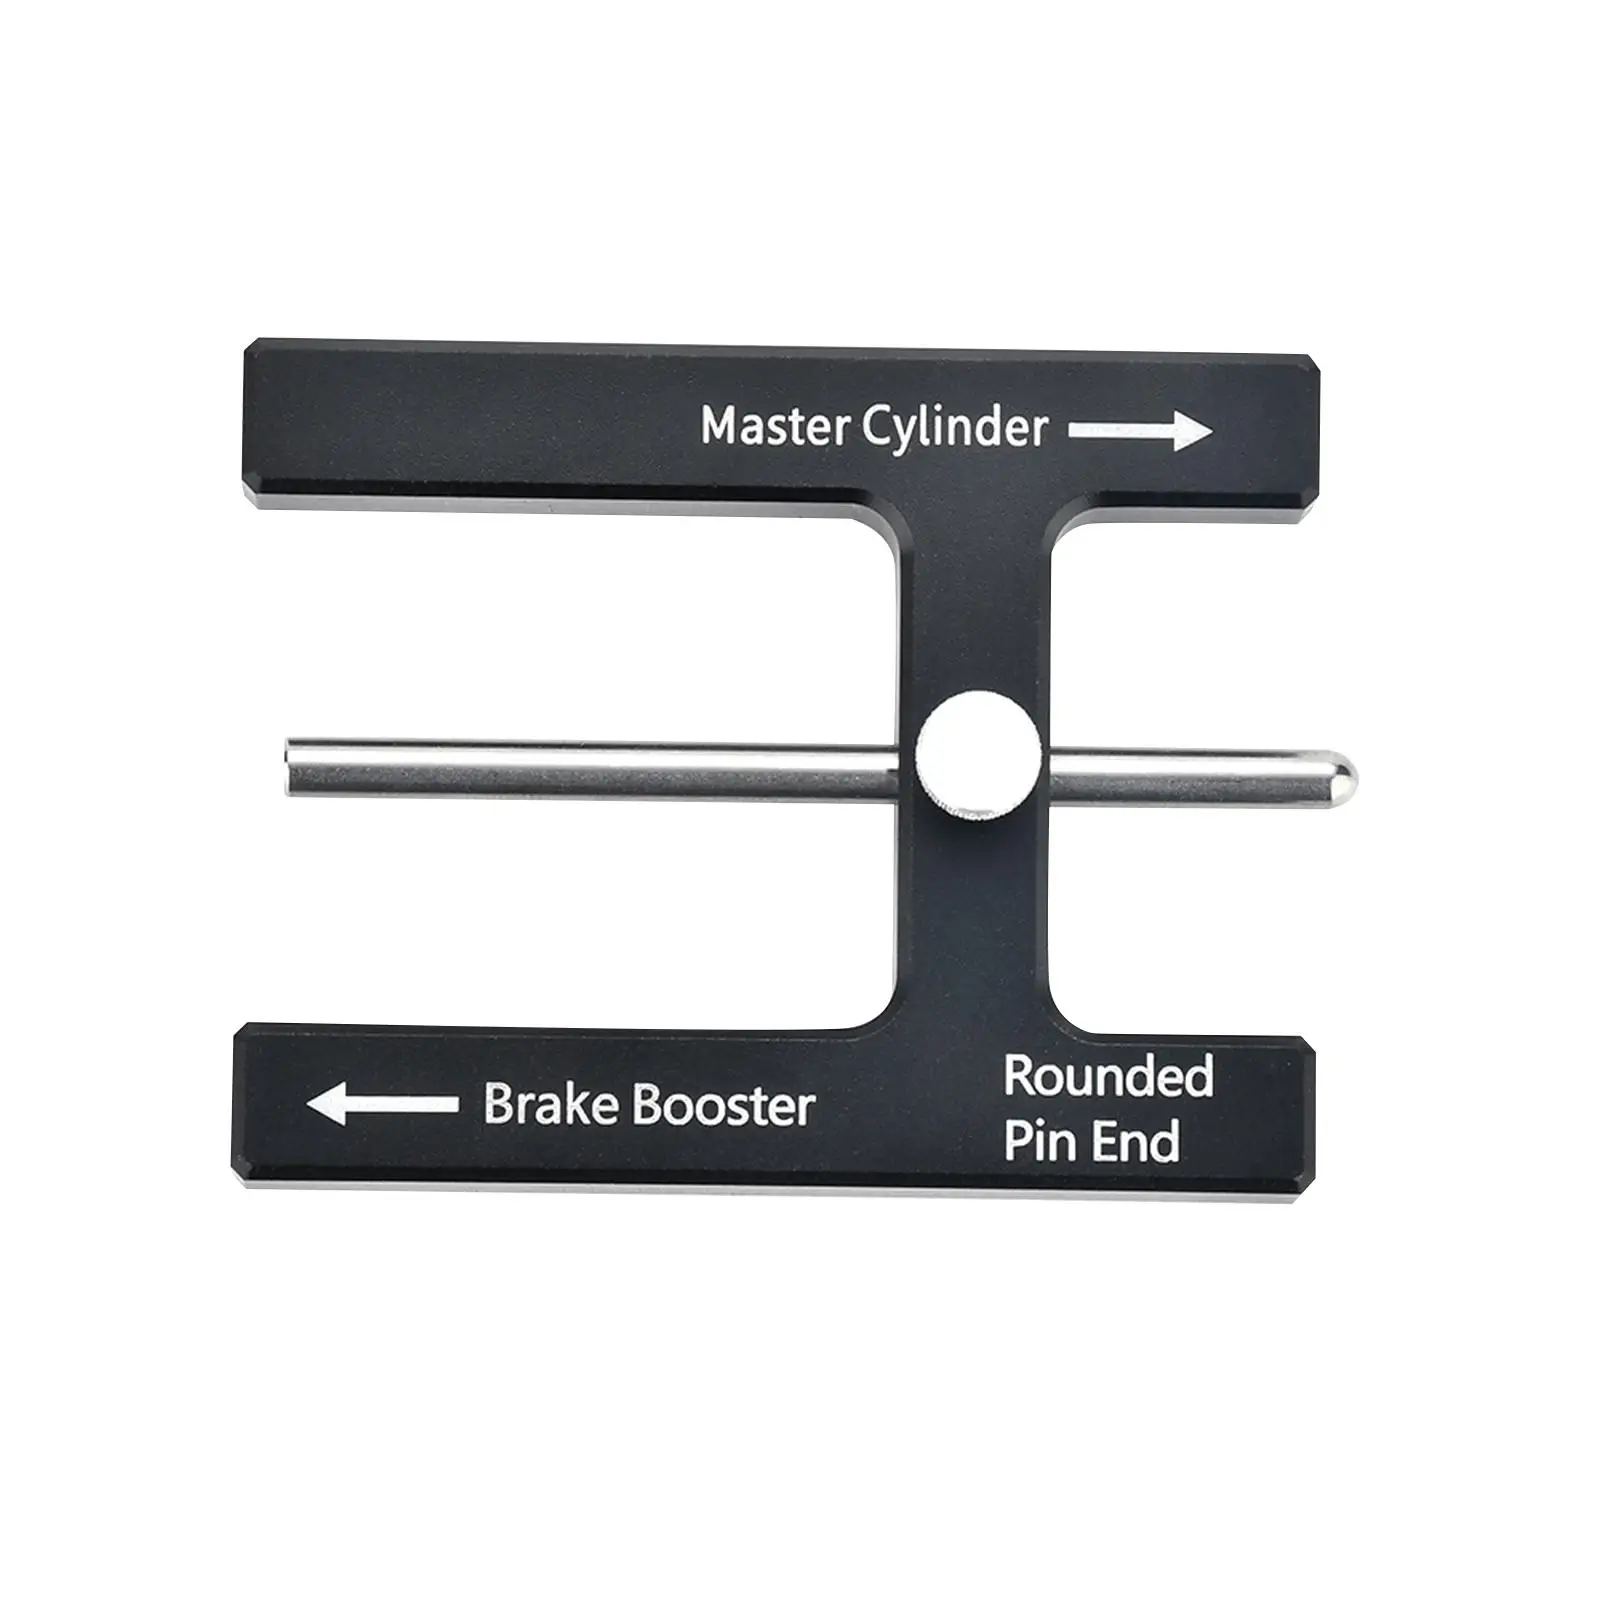 Brake Adjustment Tool Suit for Most Brake Boosters with Adjustable Pins